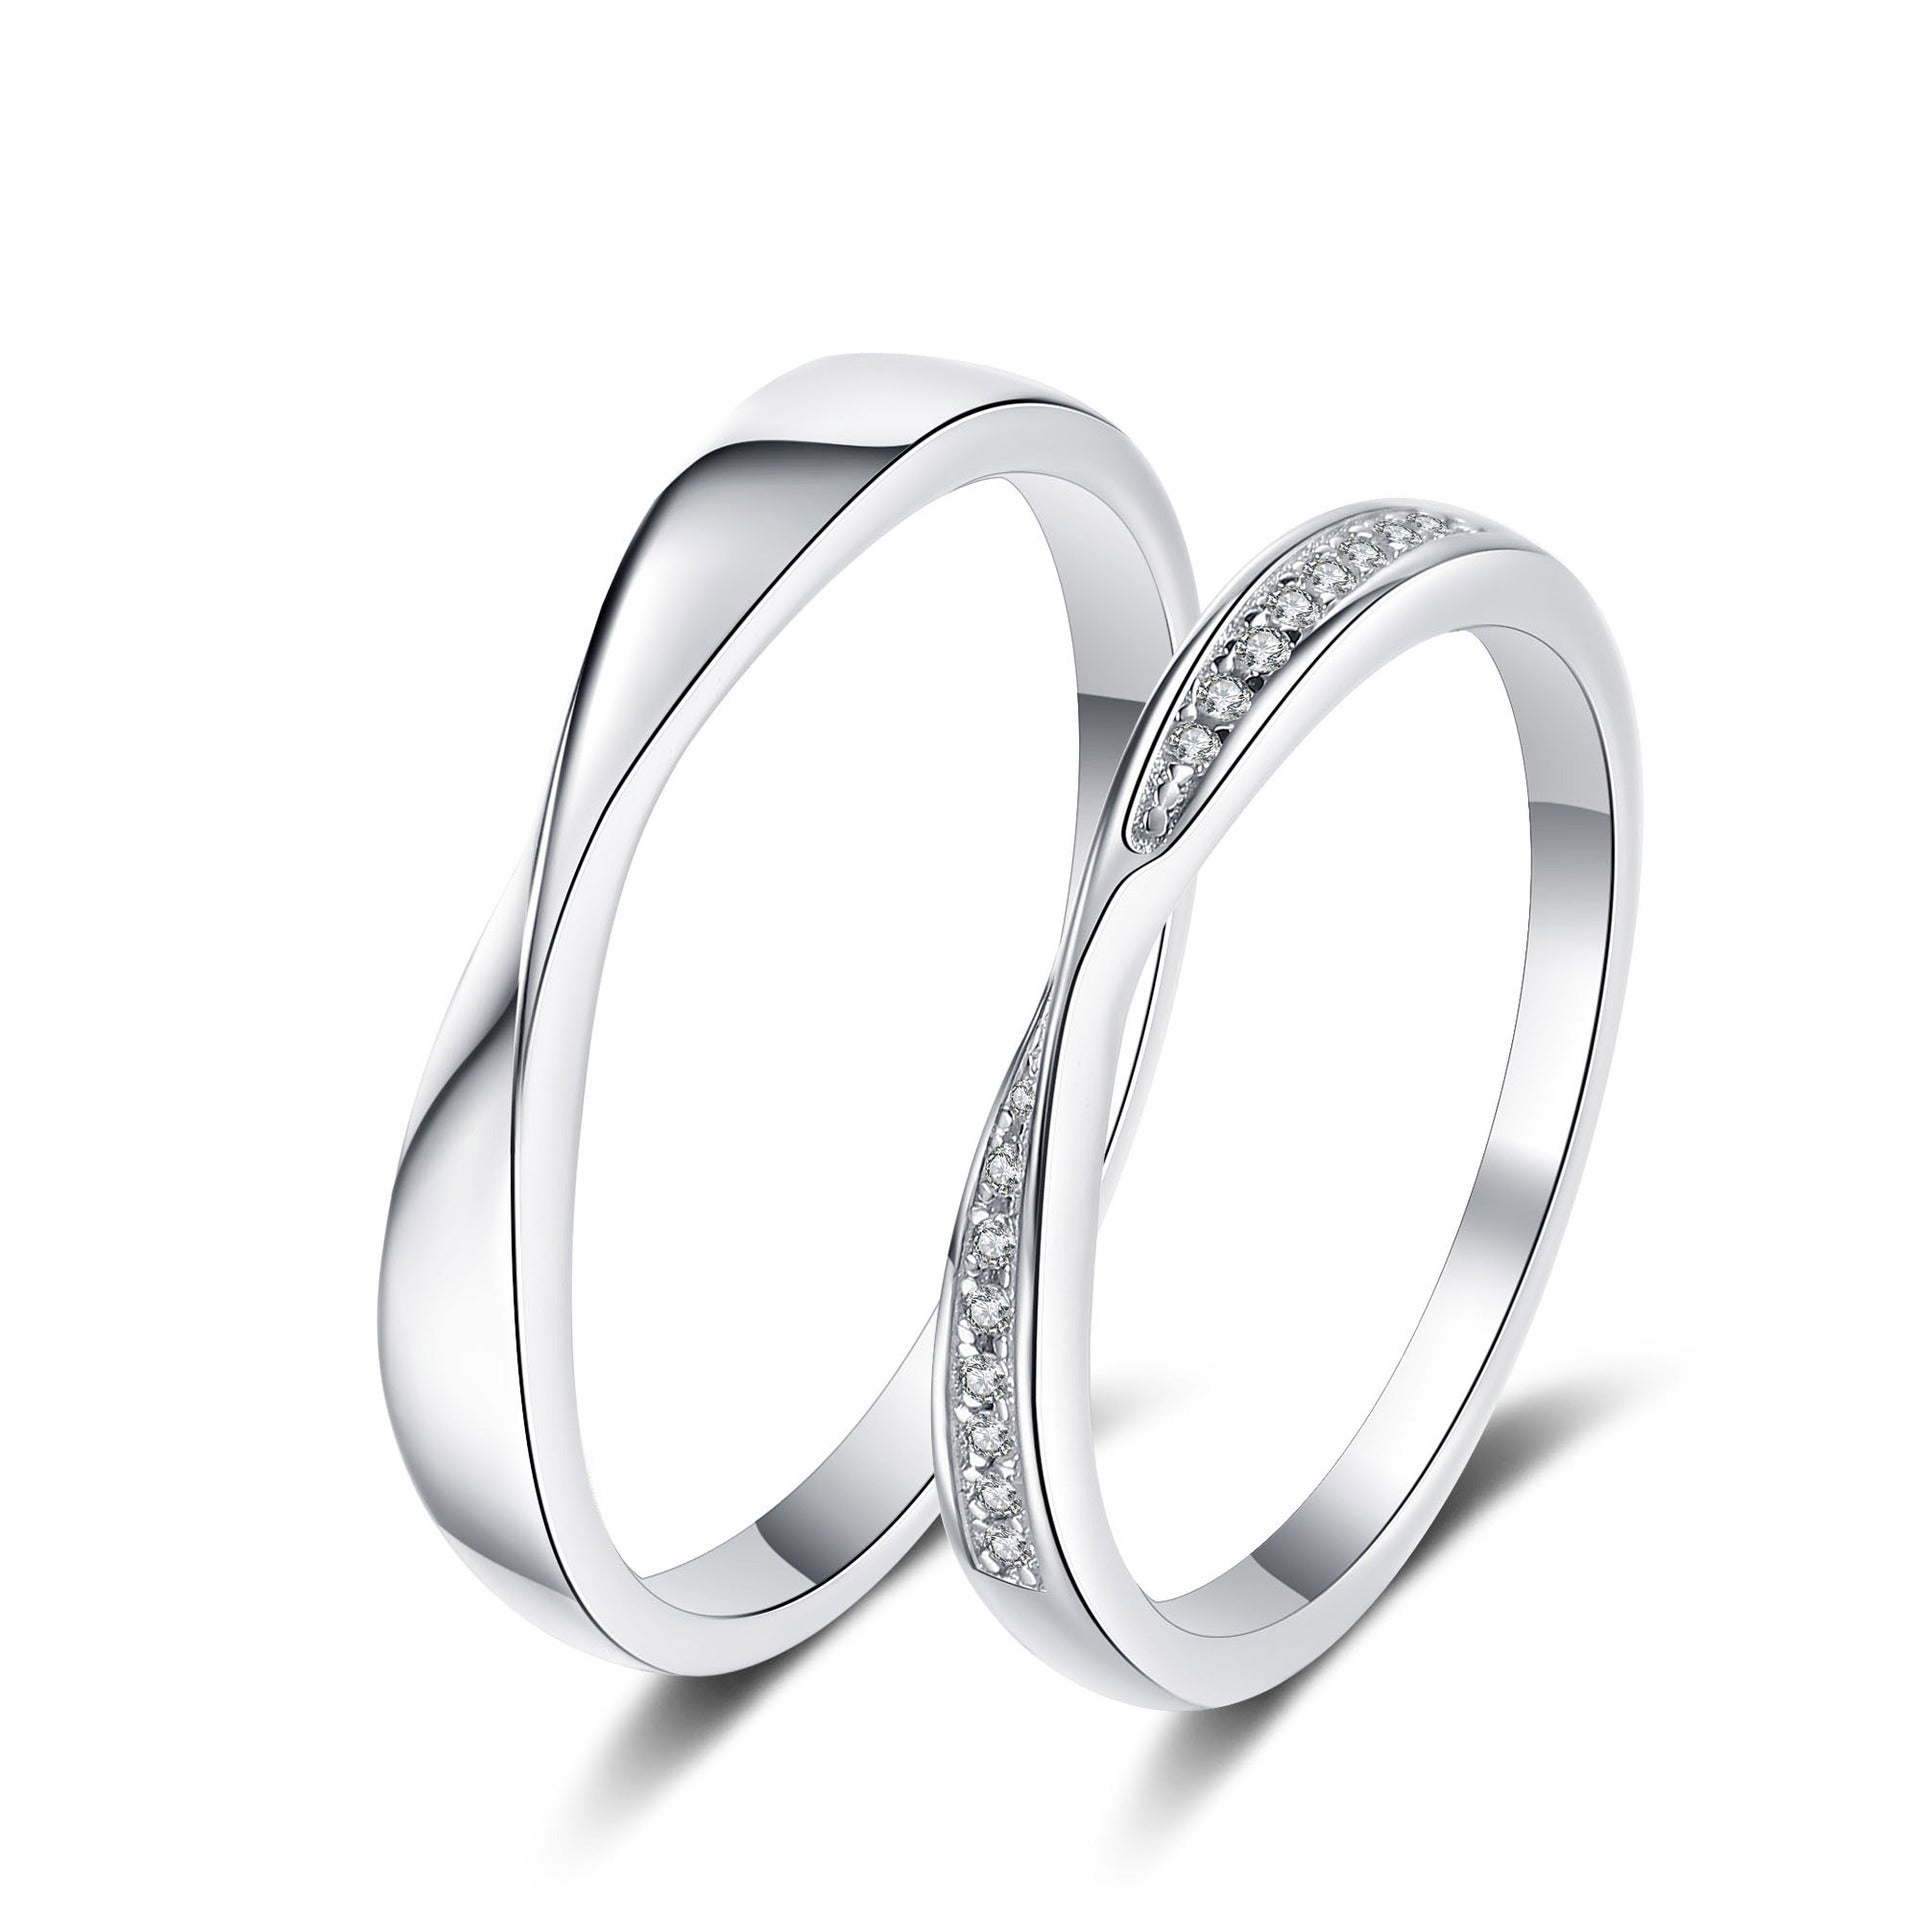 Buy Rings for Couple in Sterling Silver Online in India - Etsy